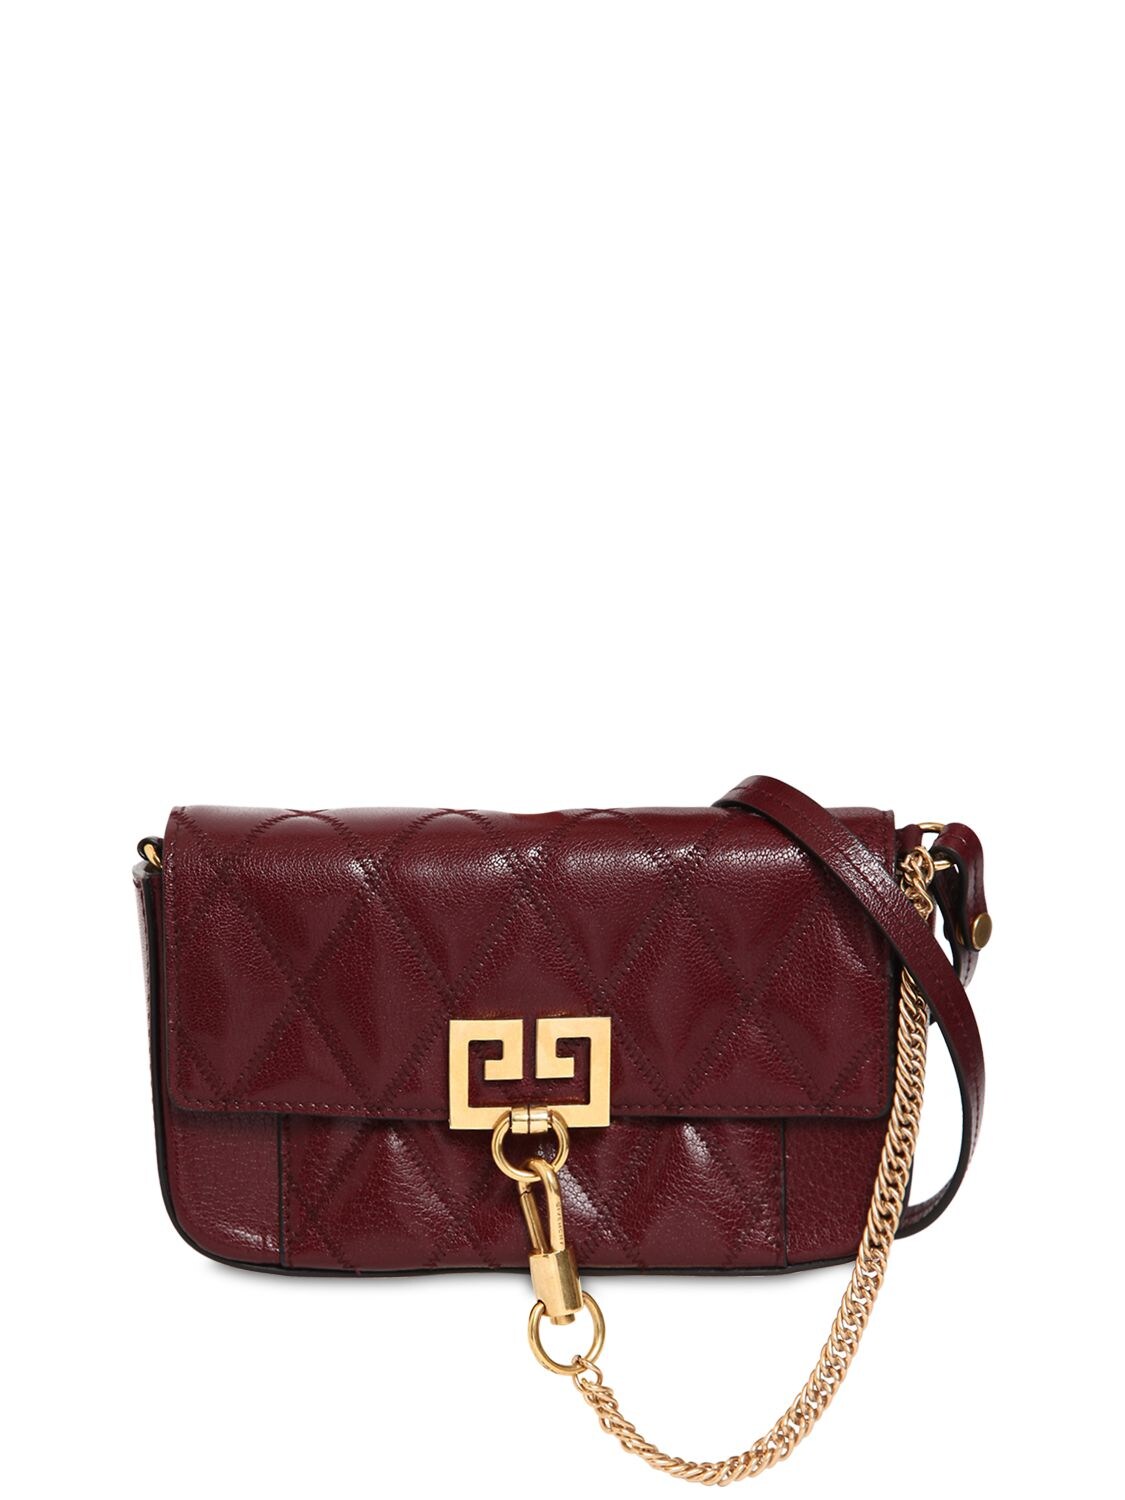 GIVENCHY MINI POCKET QUILTED LEATHER SHOULDER BAG,69IA5P009-NTQY0